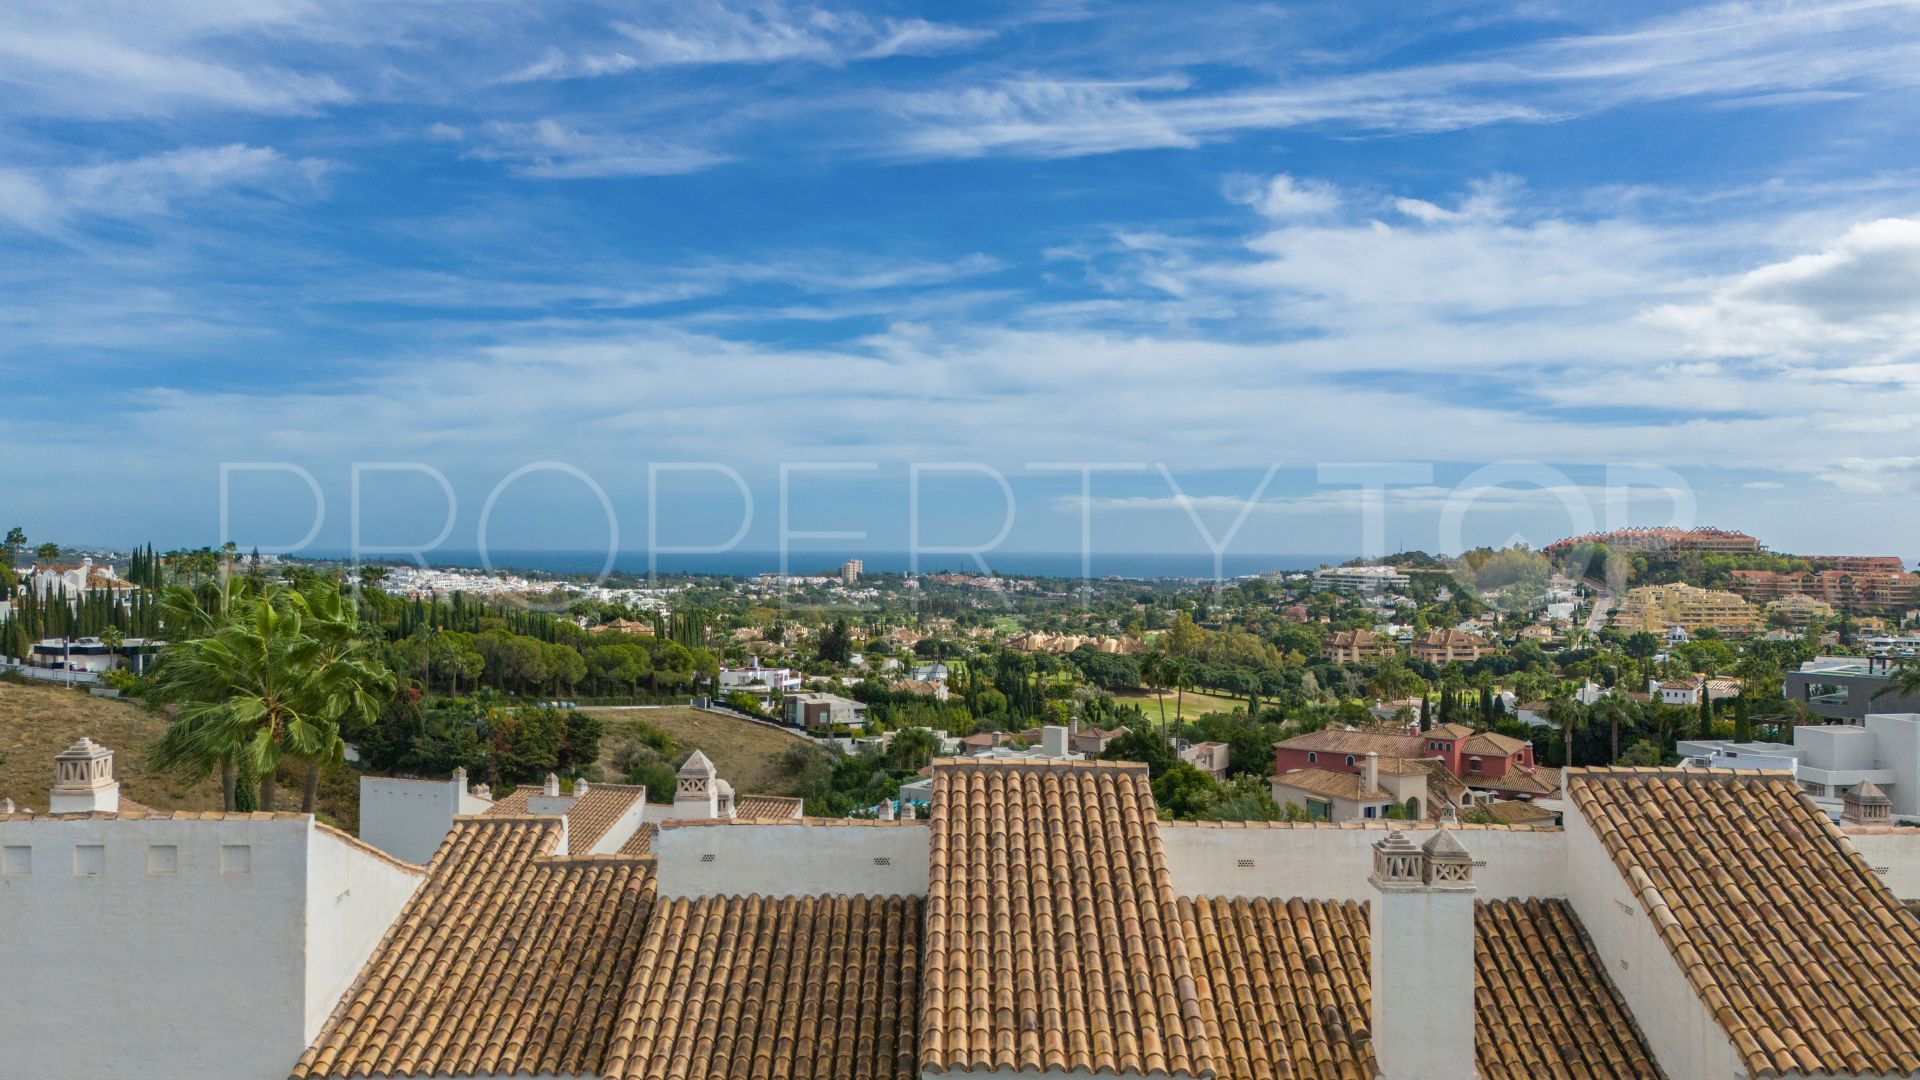 Buy Toses 3 bedrooms duplex penthouse